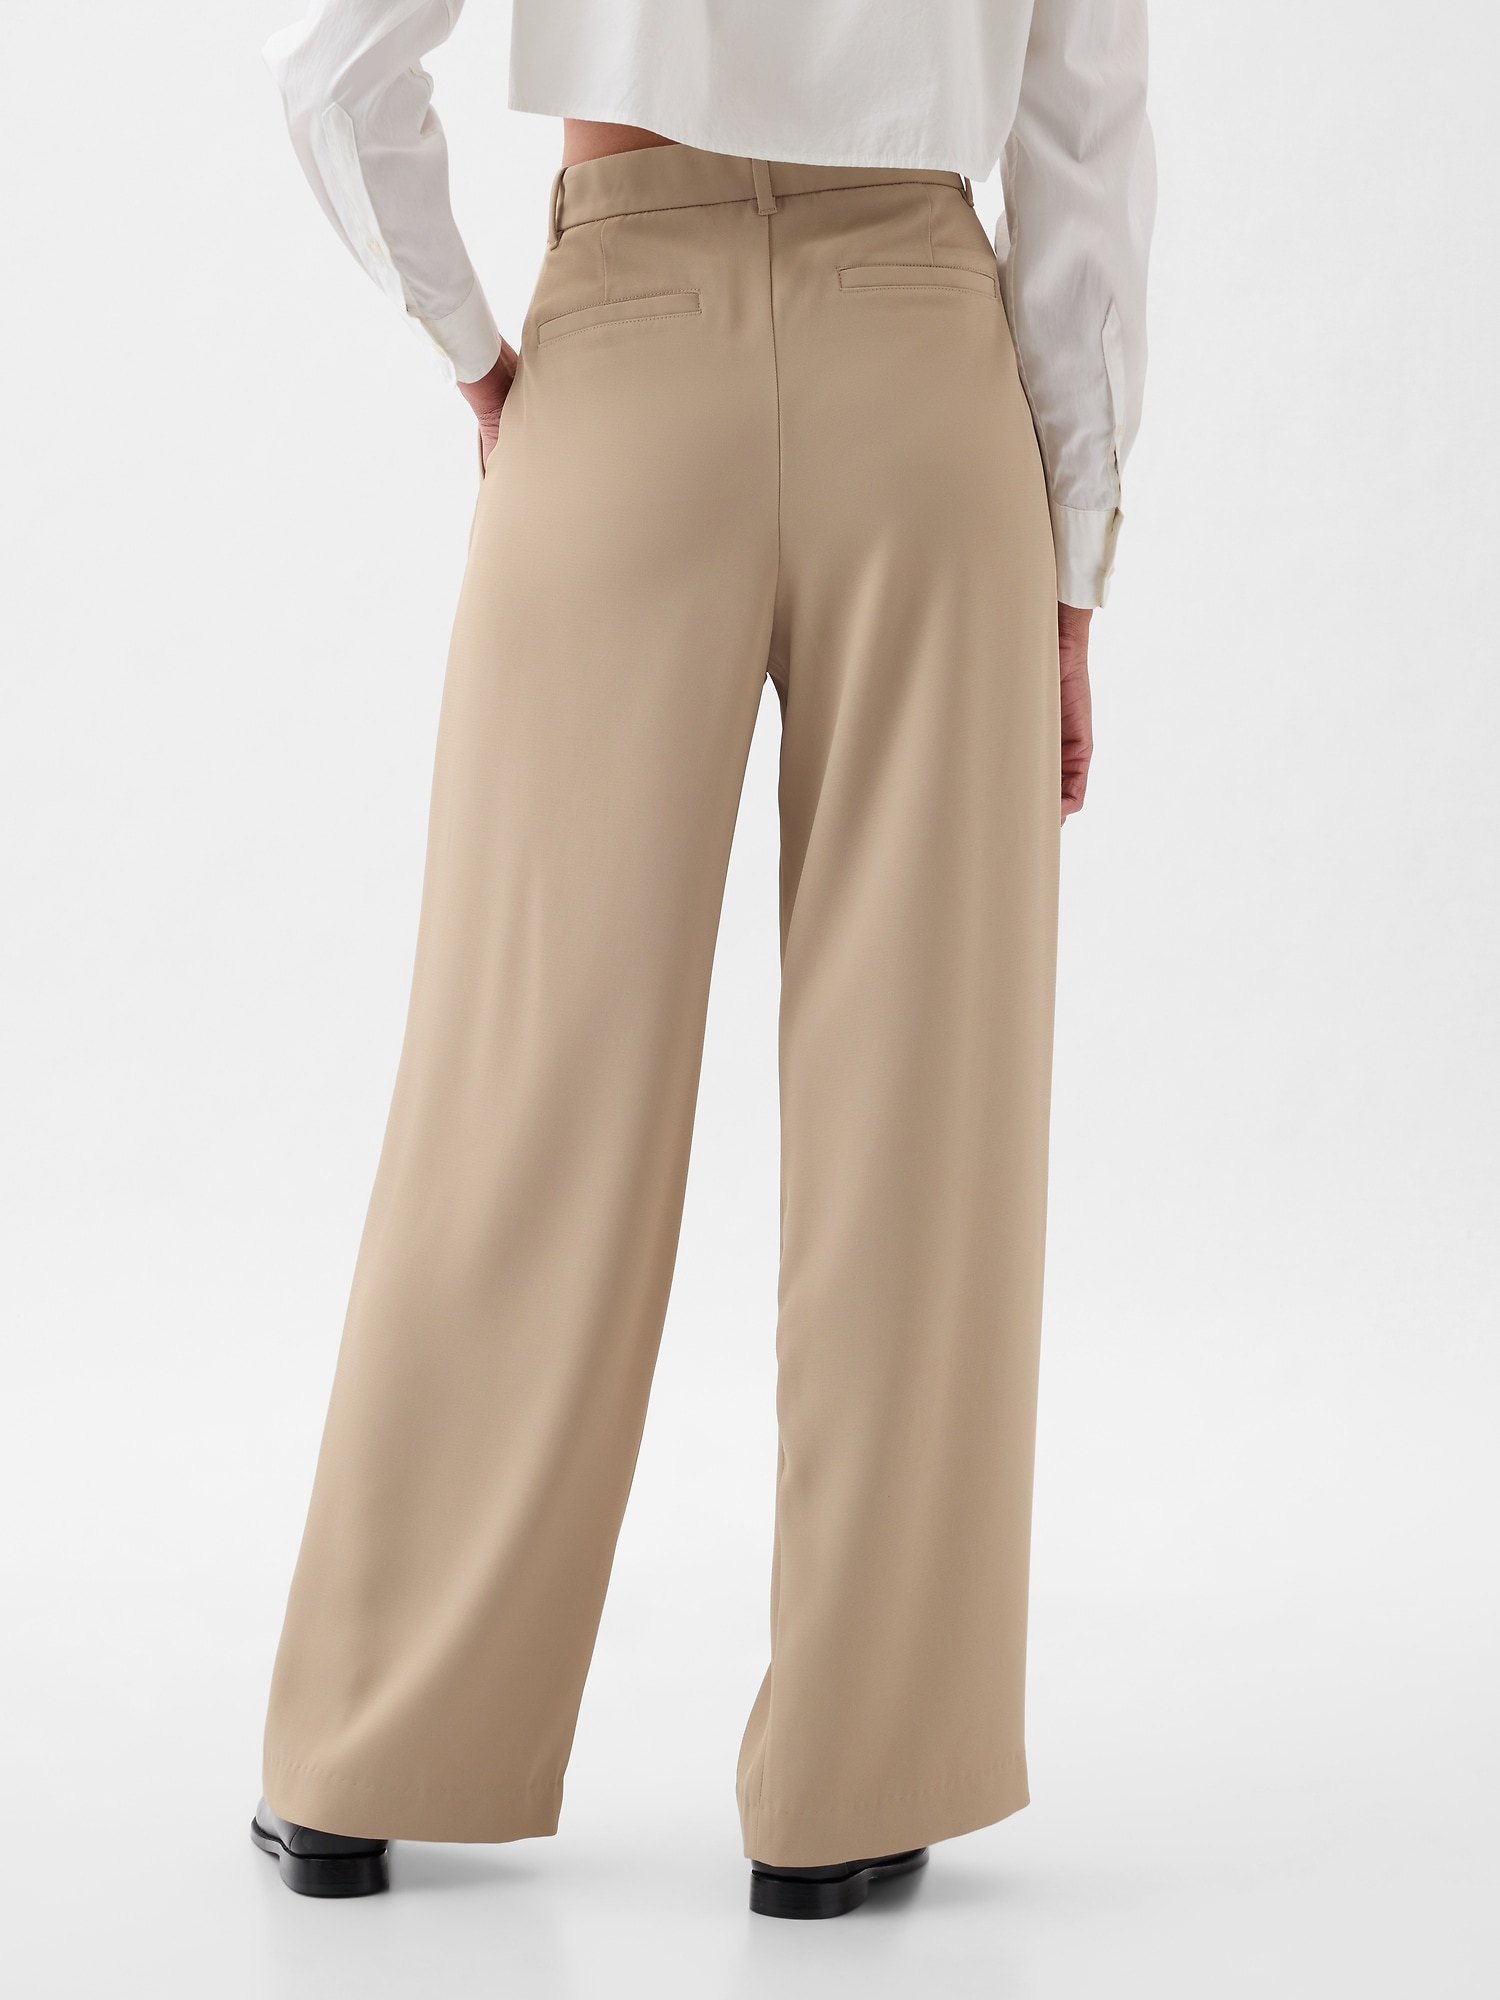 Forever 21 Women's Zip-Pocket Straight-Leg Pants in Olive Large | MainPlace  Mall